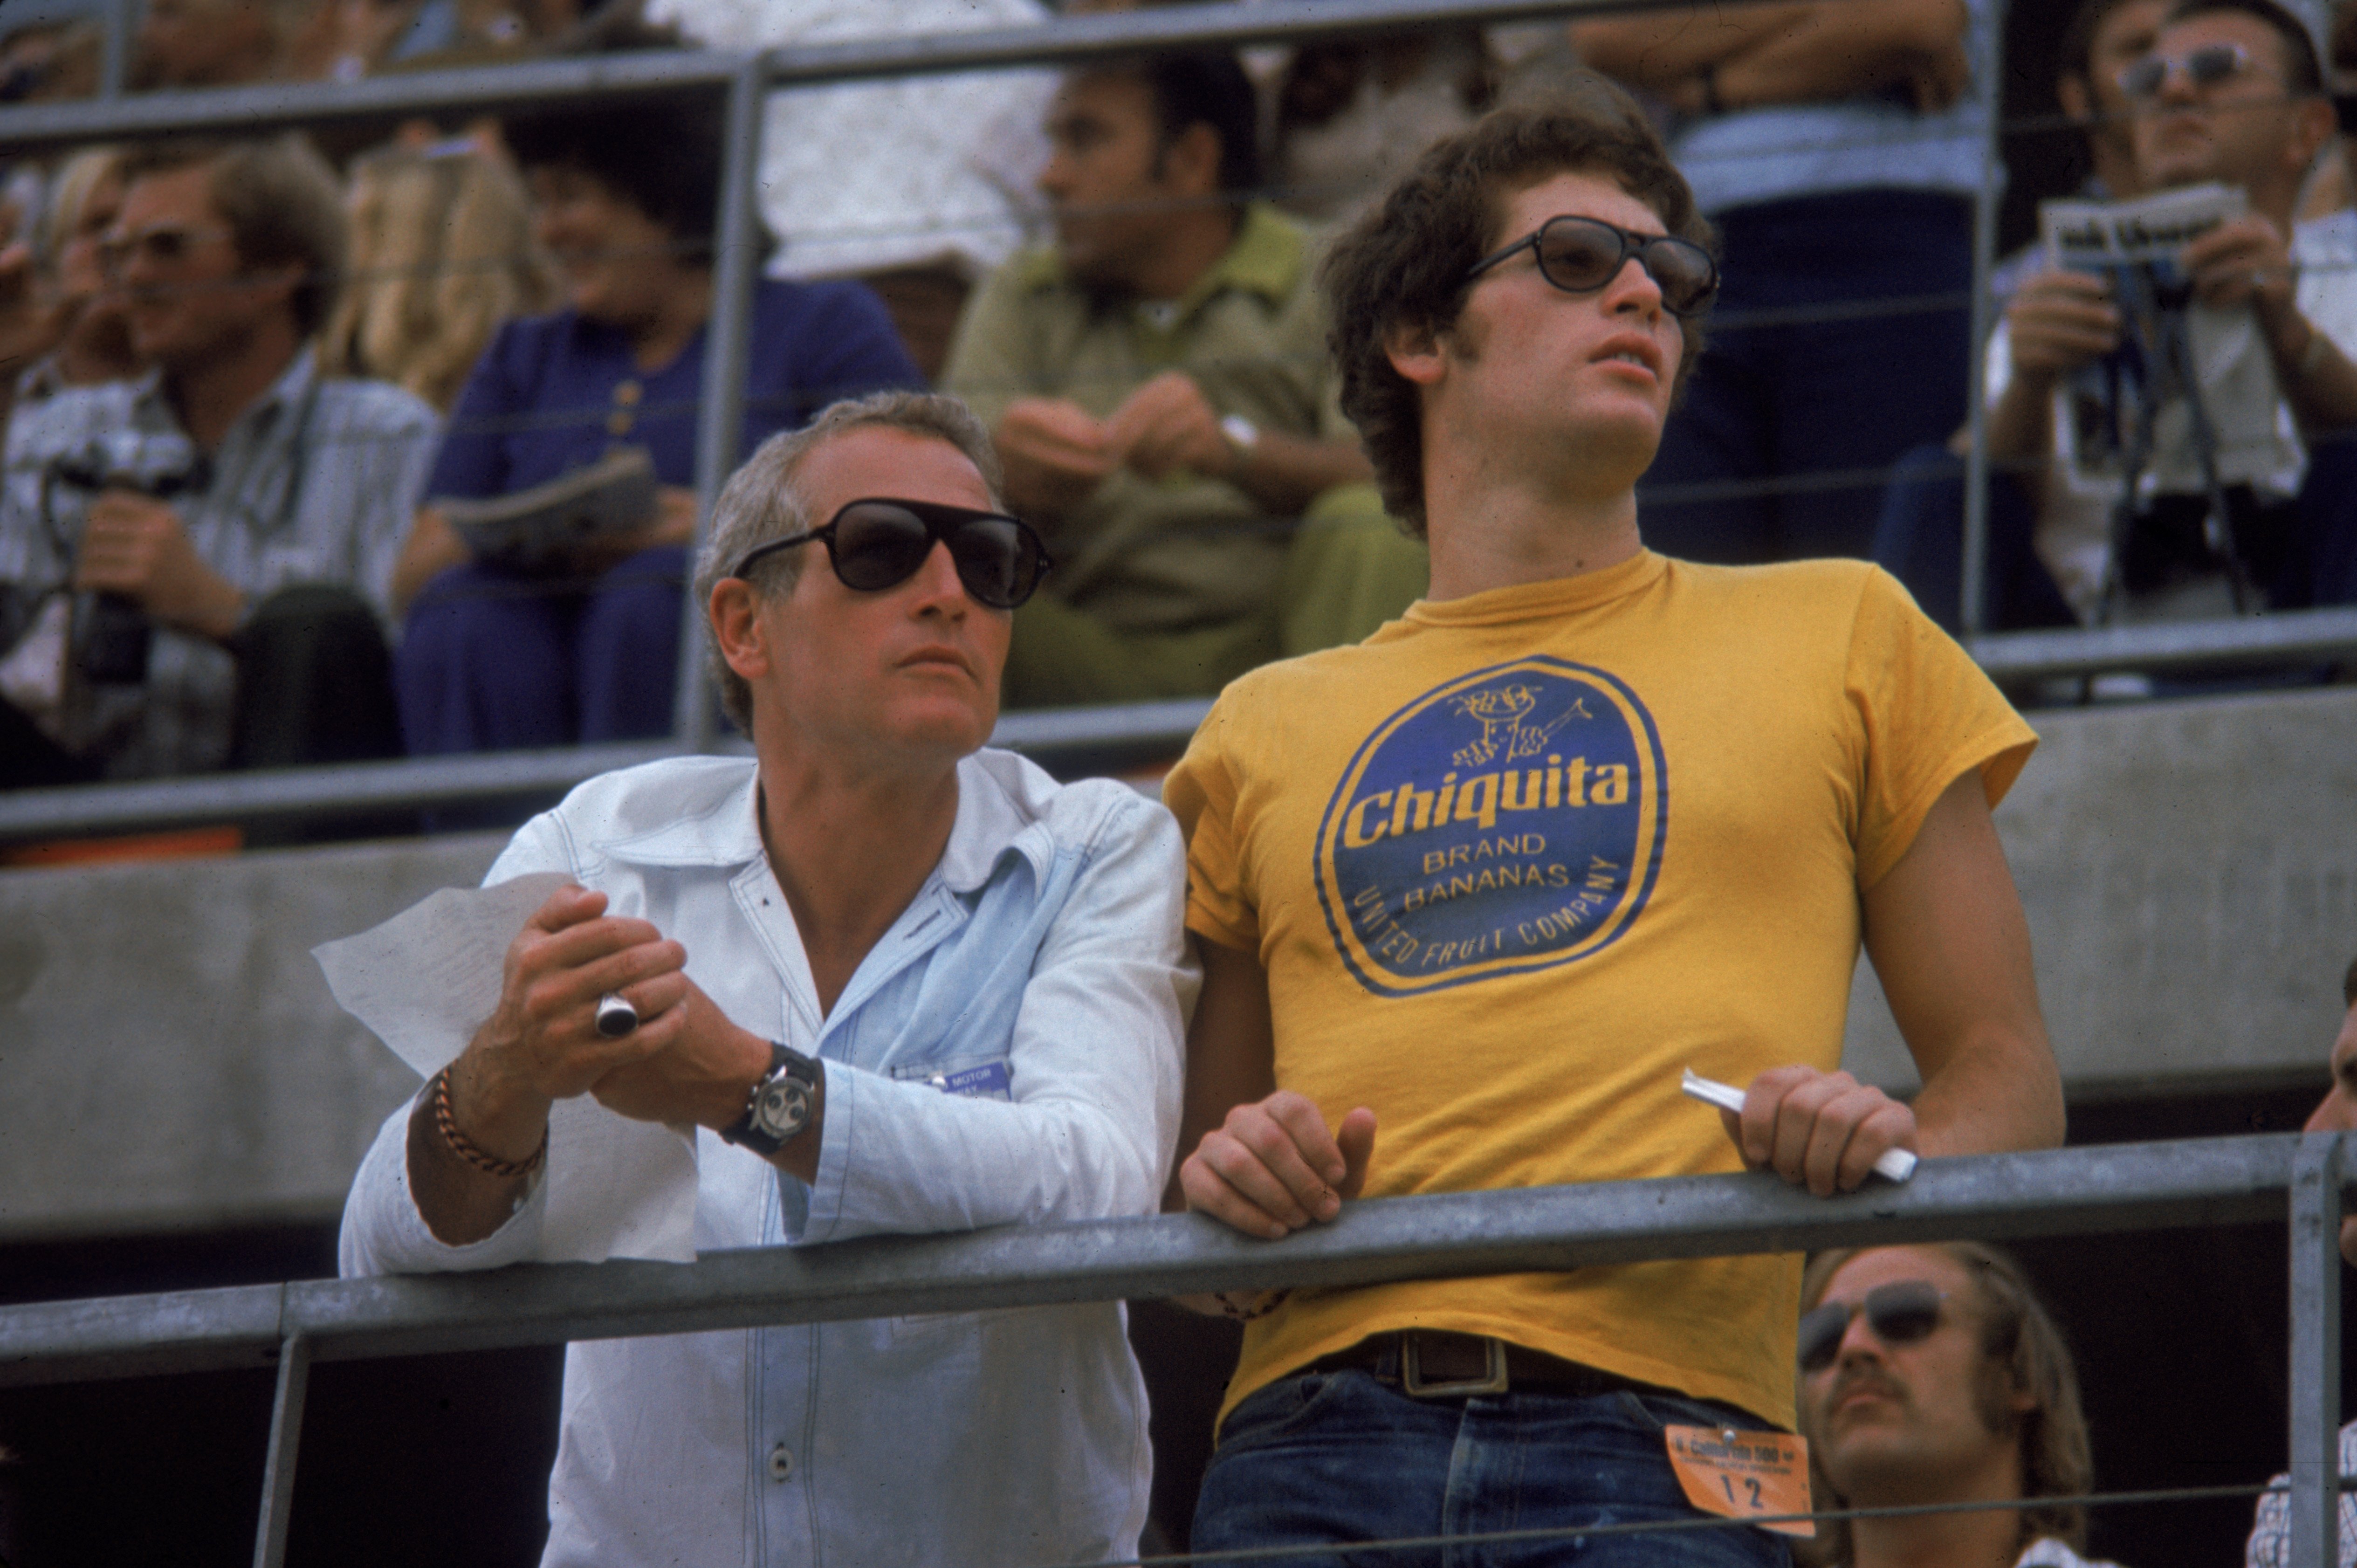 Paul Newman and his son Scott Newman attend the Ontarion 500 automobile race, on September 3, 1972 in Ontario, California. | Photo: Getty Images